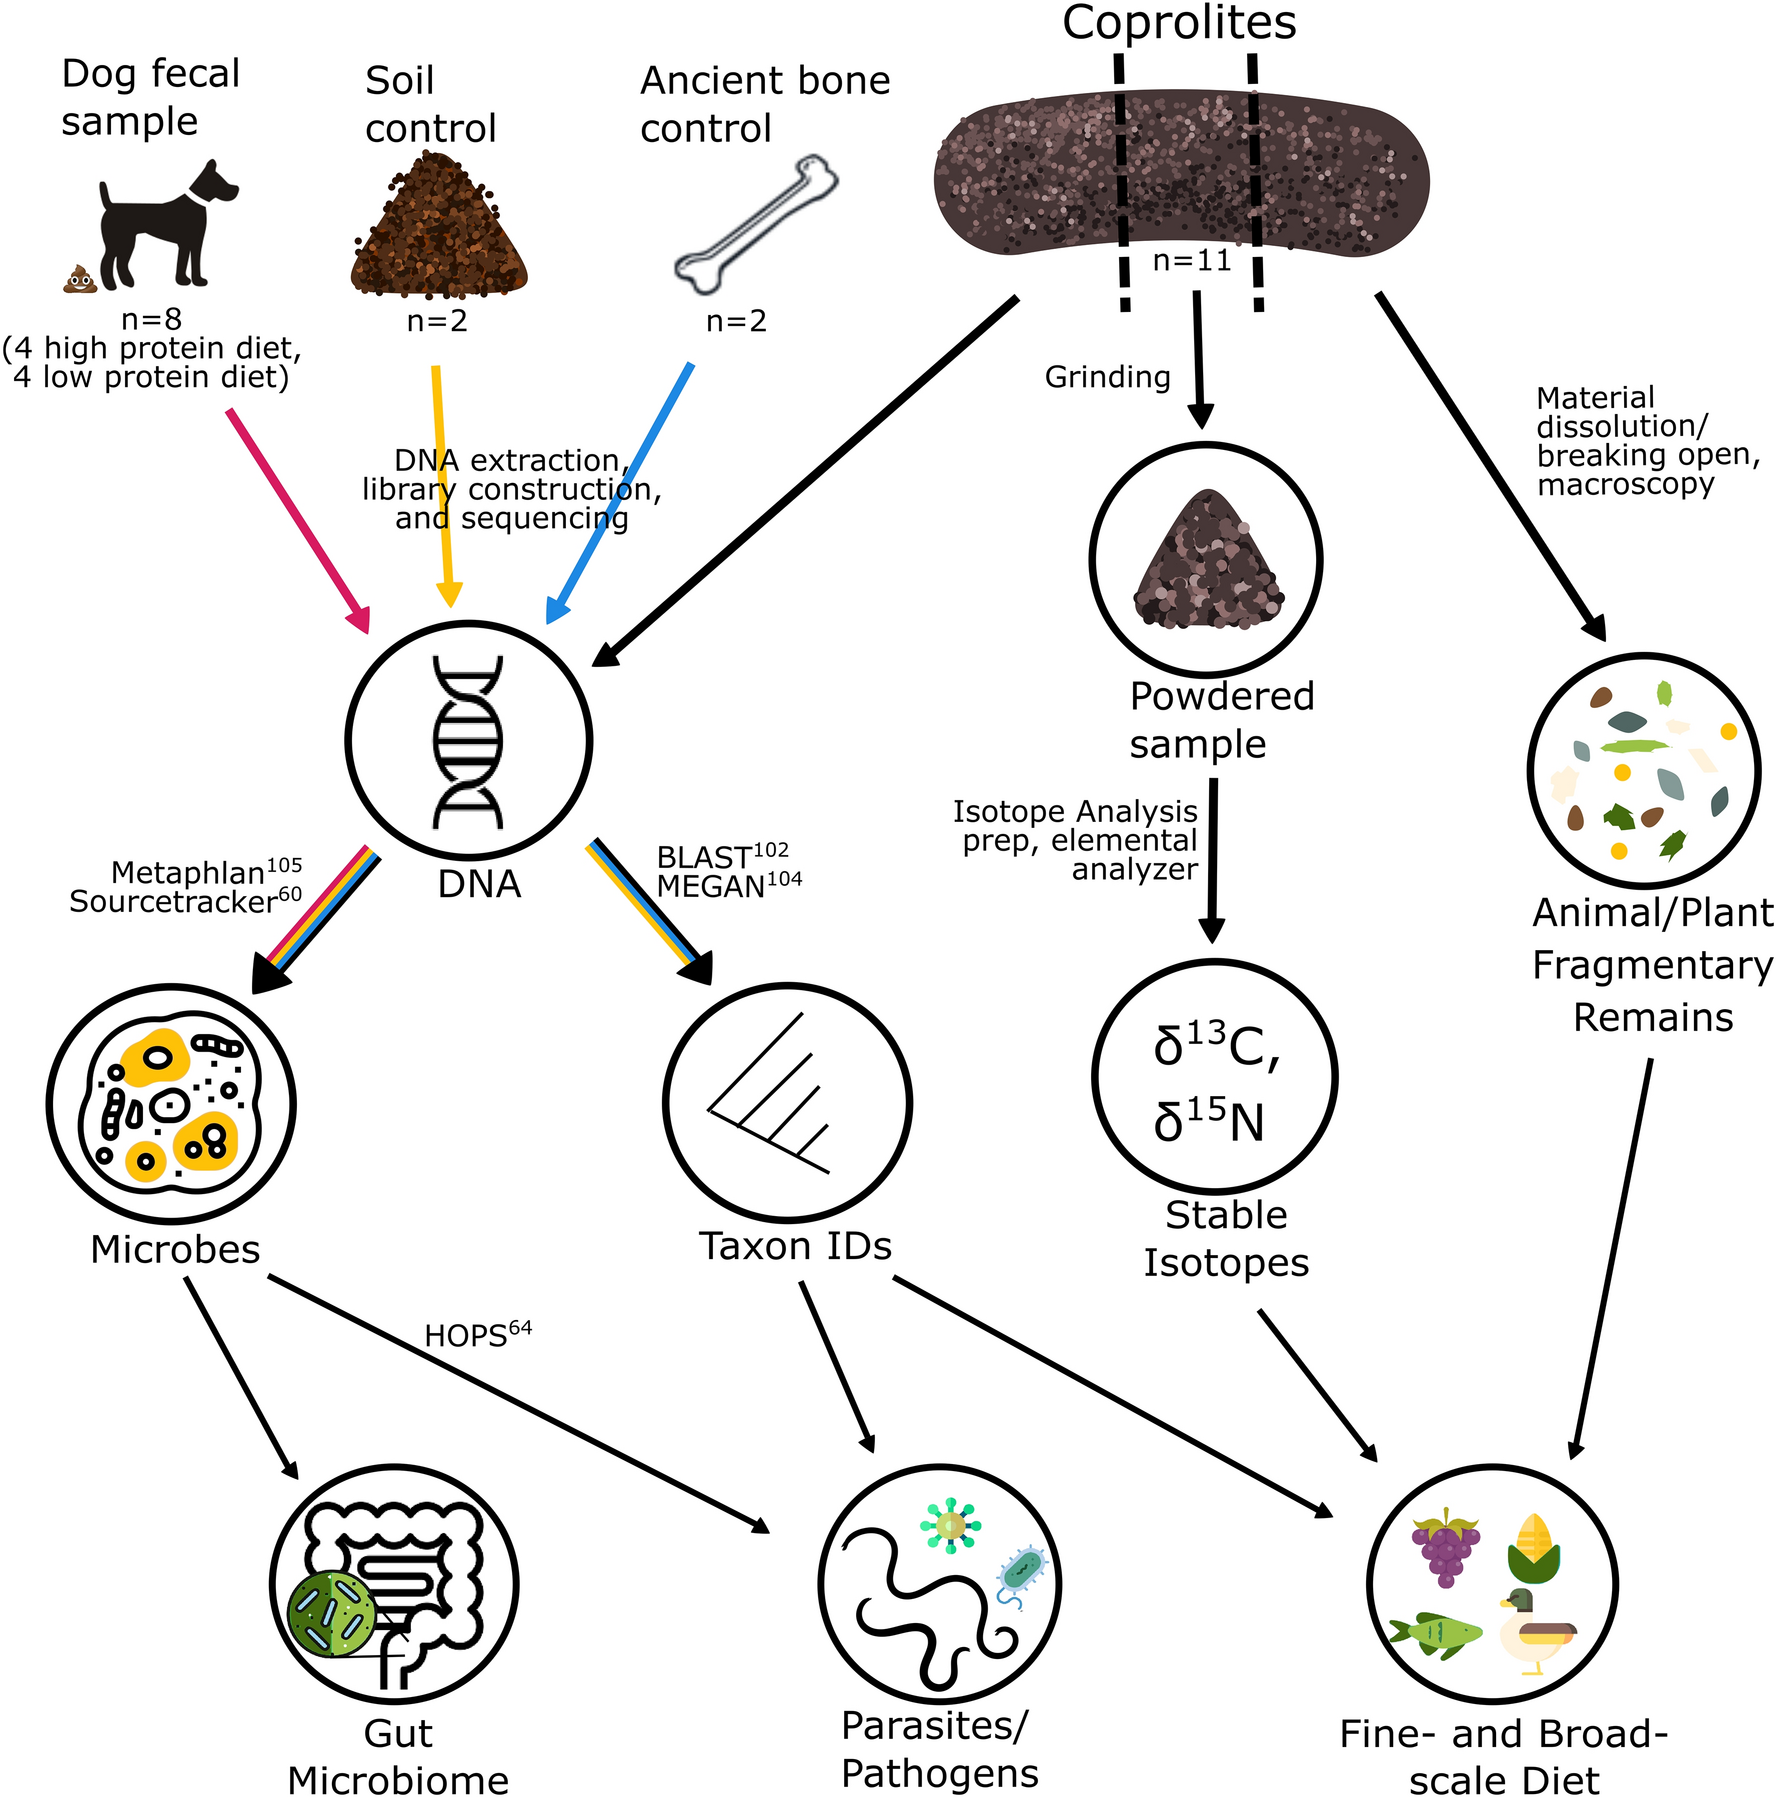 Integrative analysis of DNA, macroscopic remains and stable isotopes of dog  coprolites to reconstruct community diet | Scientific Reports